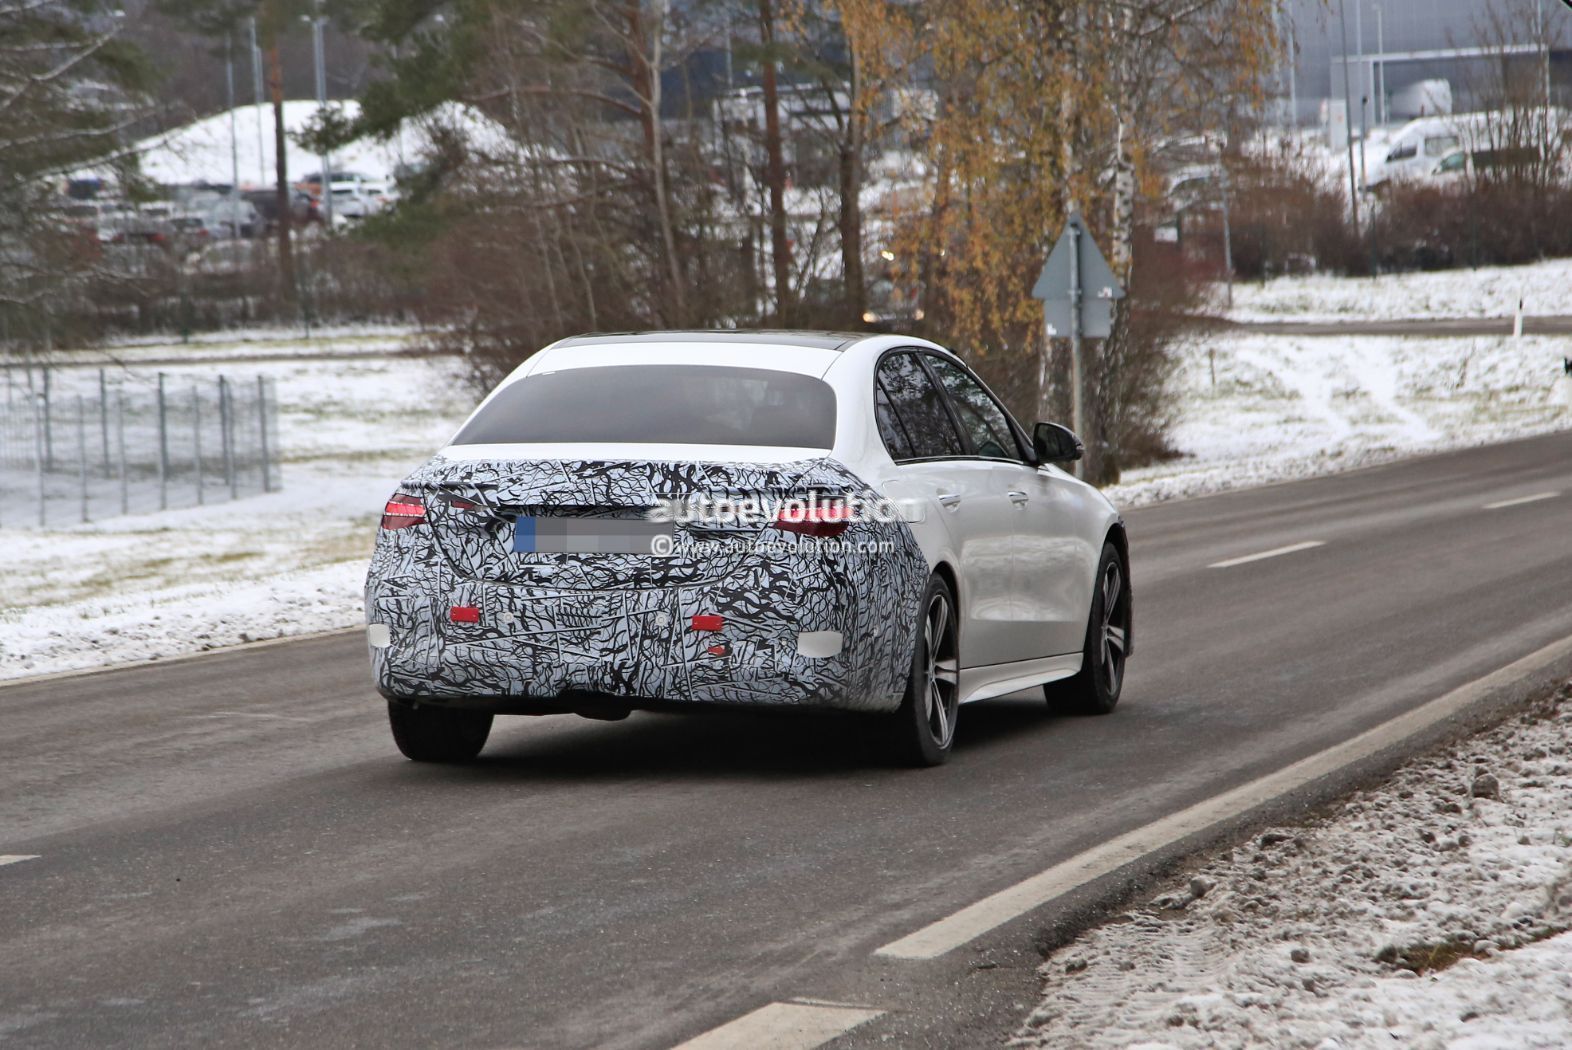 2022 Mercedes-Benz C-Class W206 Prototype Shows Up Naked in